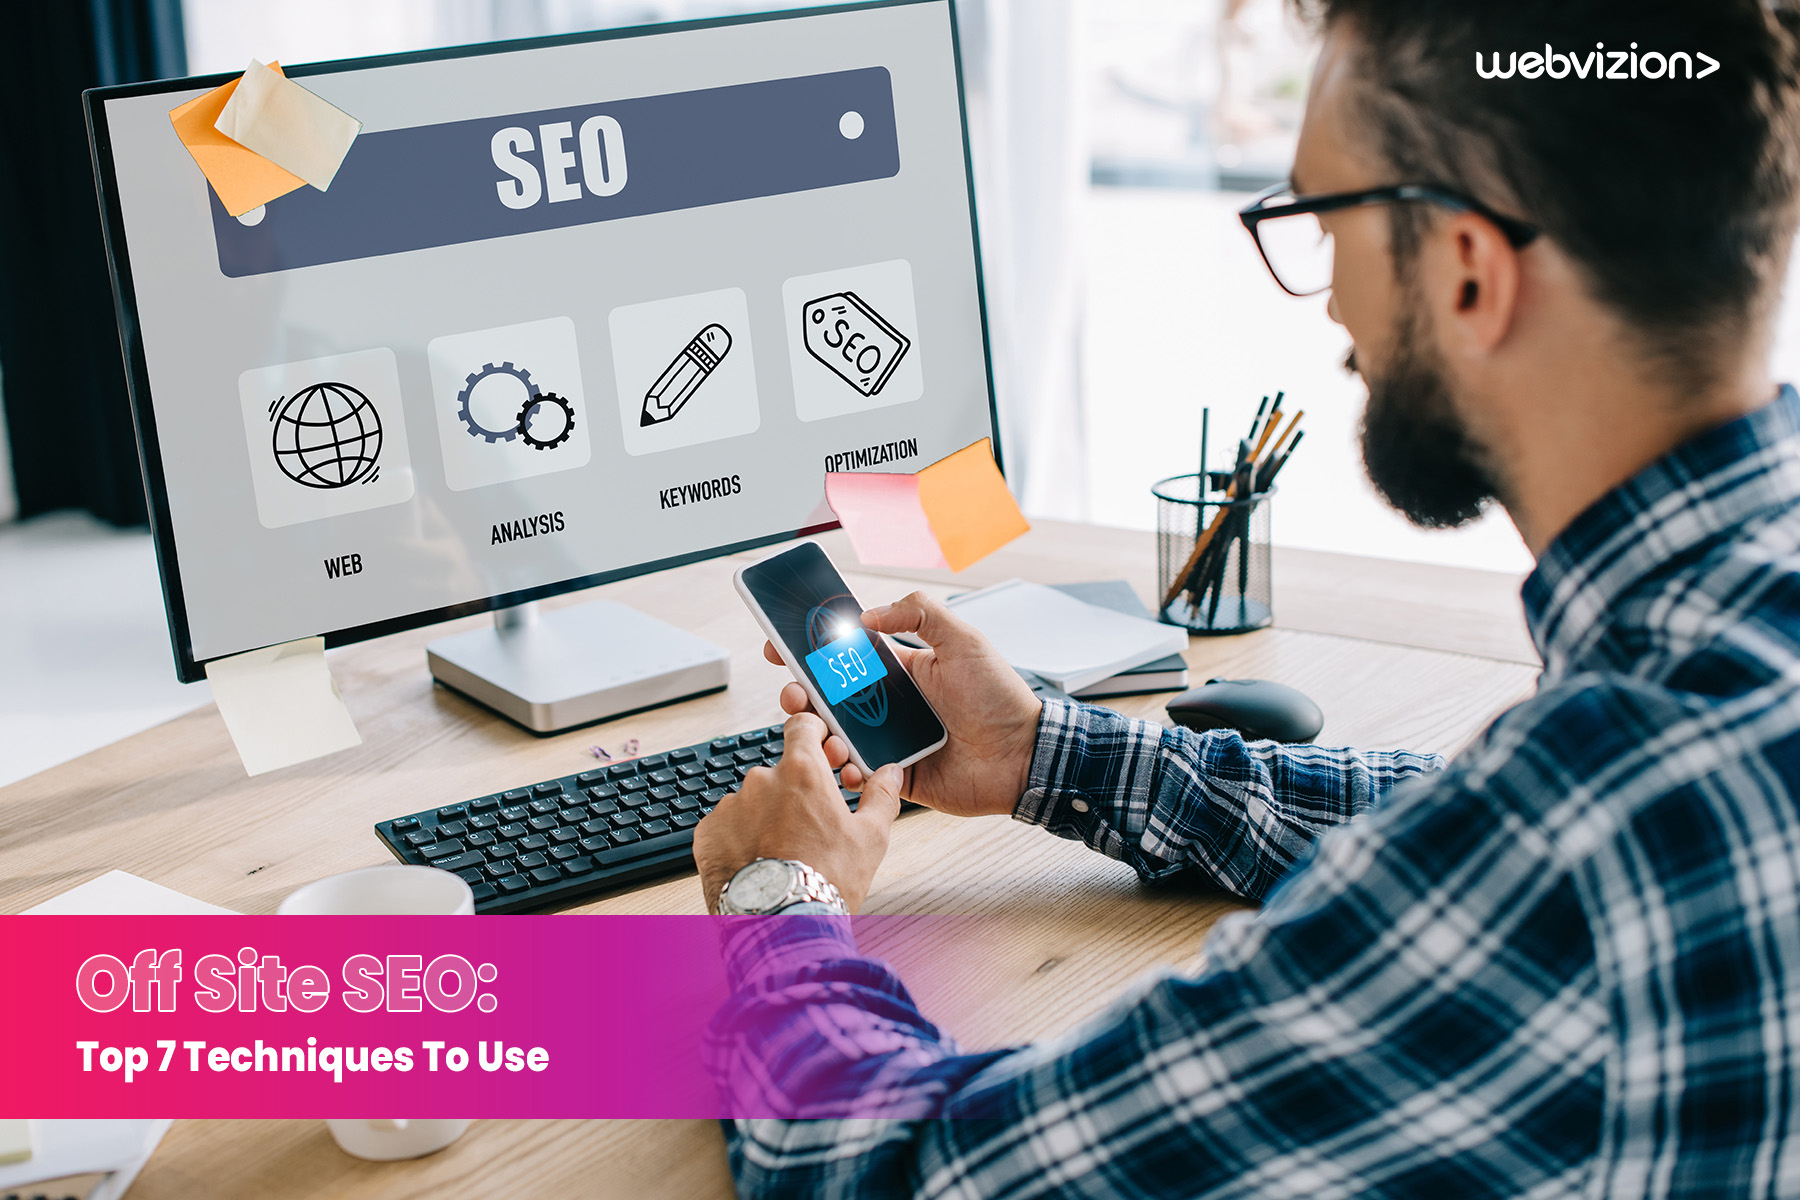 Off Site SEO: Top 7 Techniques To Use